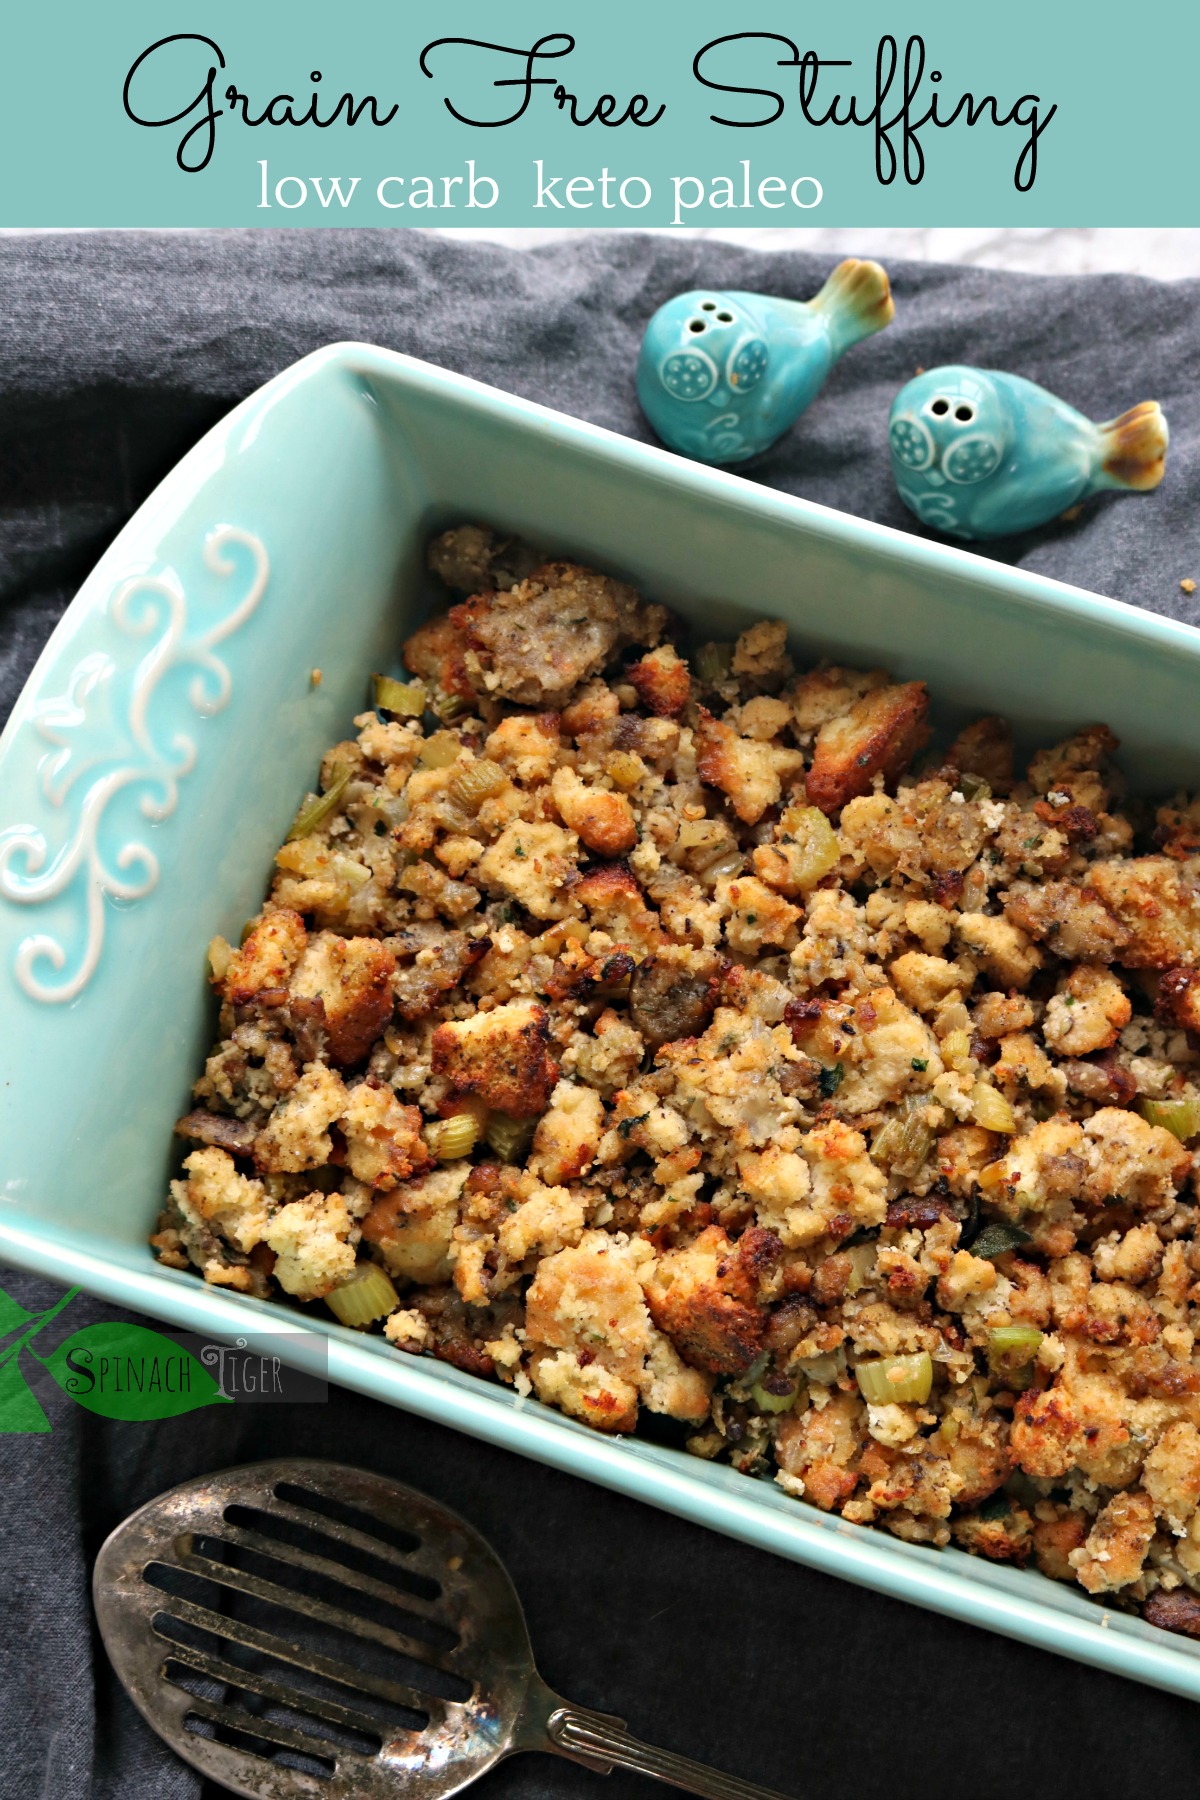 Grain Free Stuffing from Spinach Tiger